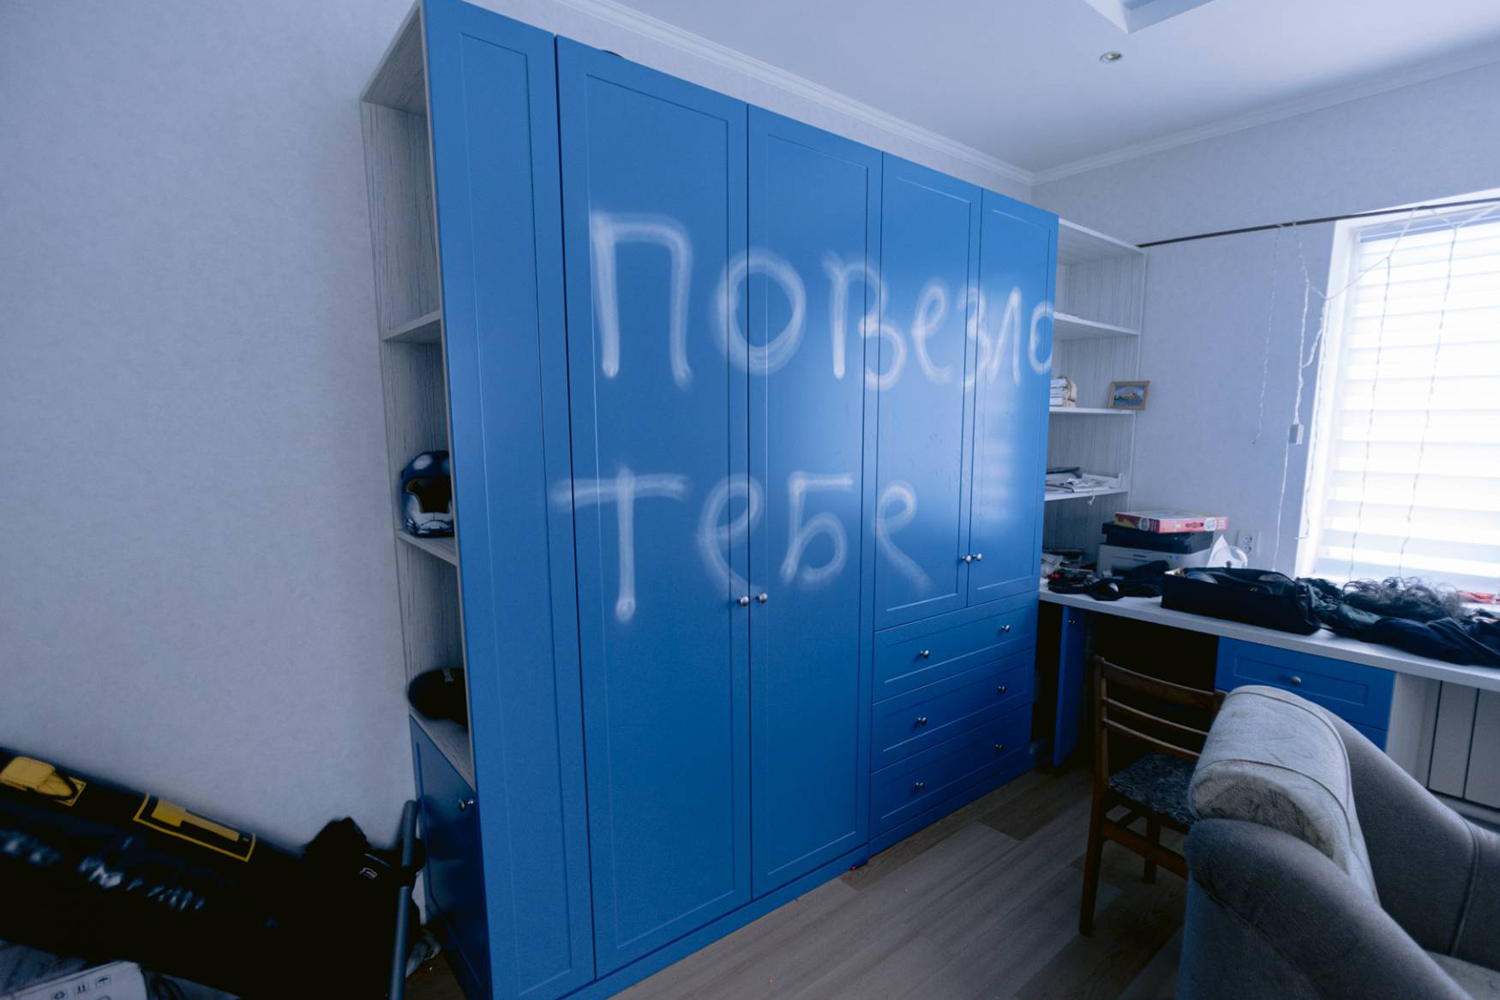 A blue wardrobe in a private apartment with inscription by Russian occupiers in Ukraine